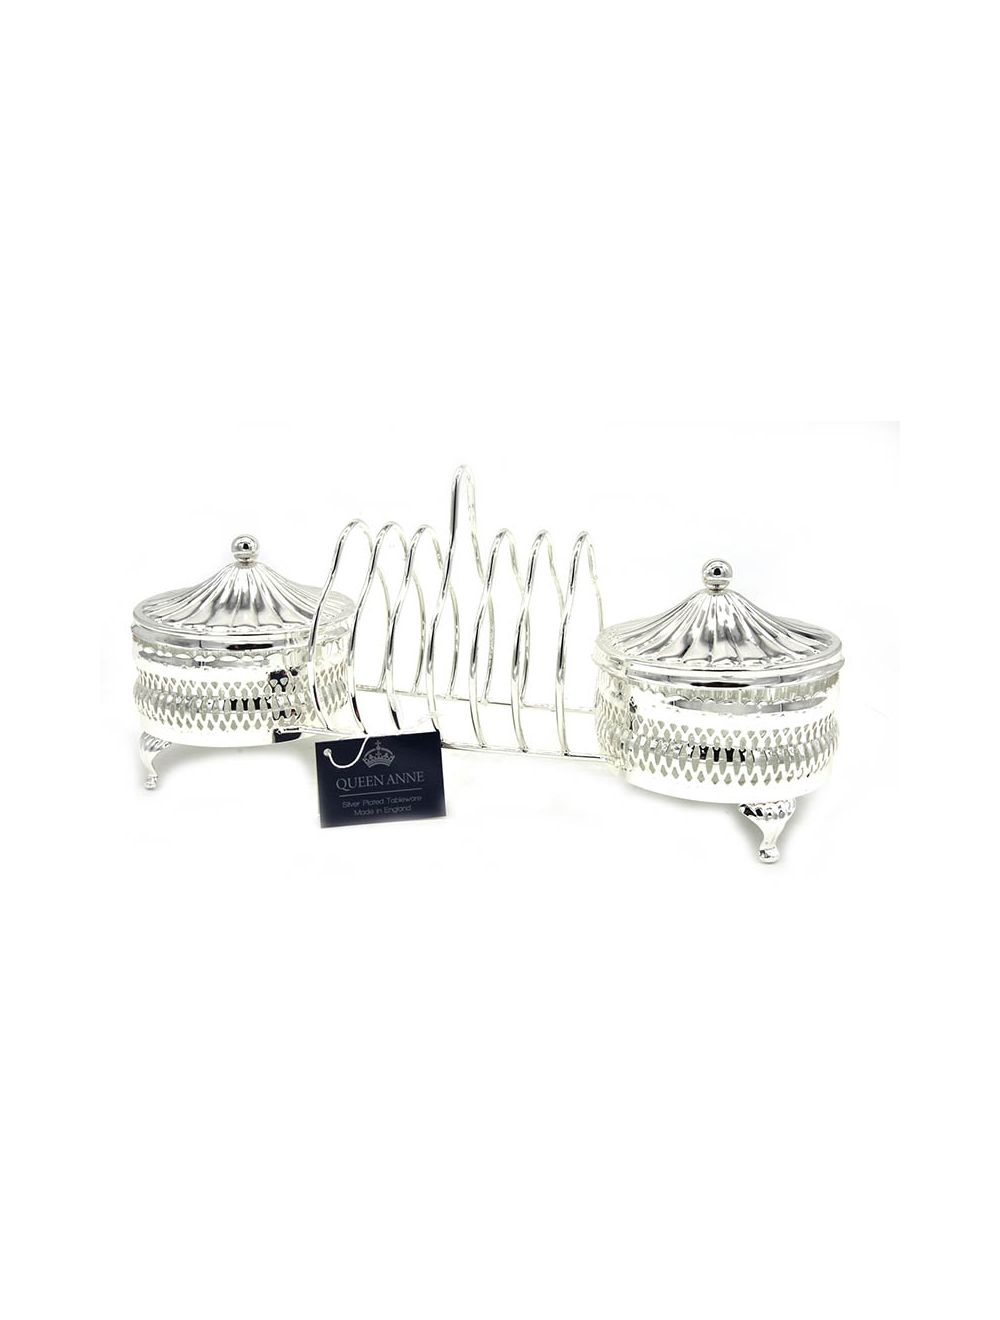 Breakfast Set with Rack And Two Bowls + Lids 30.5x10x14 cm